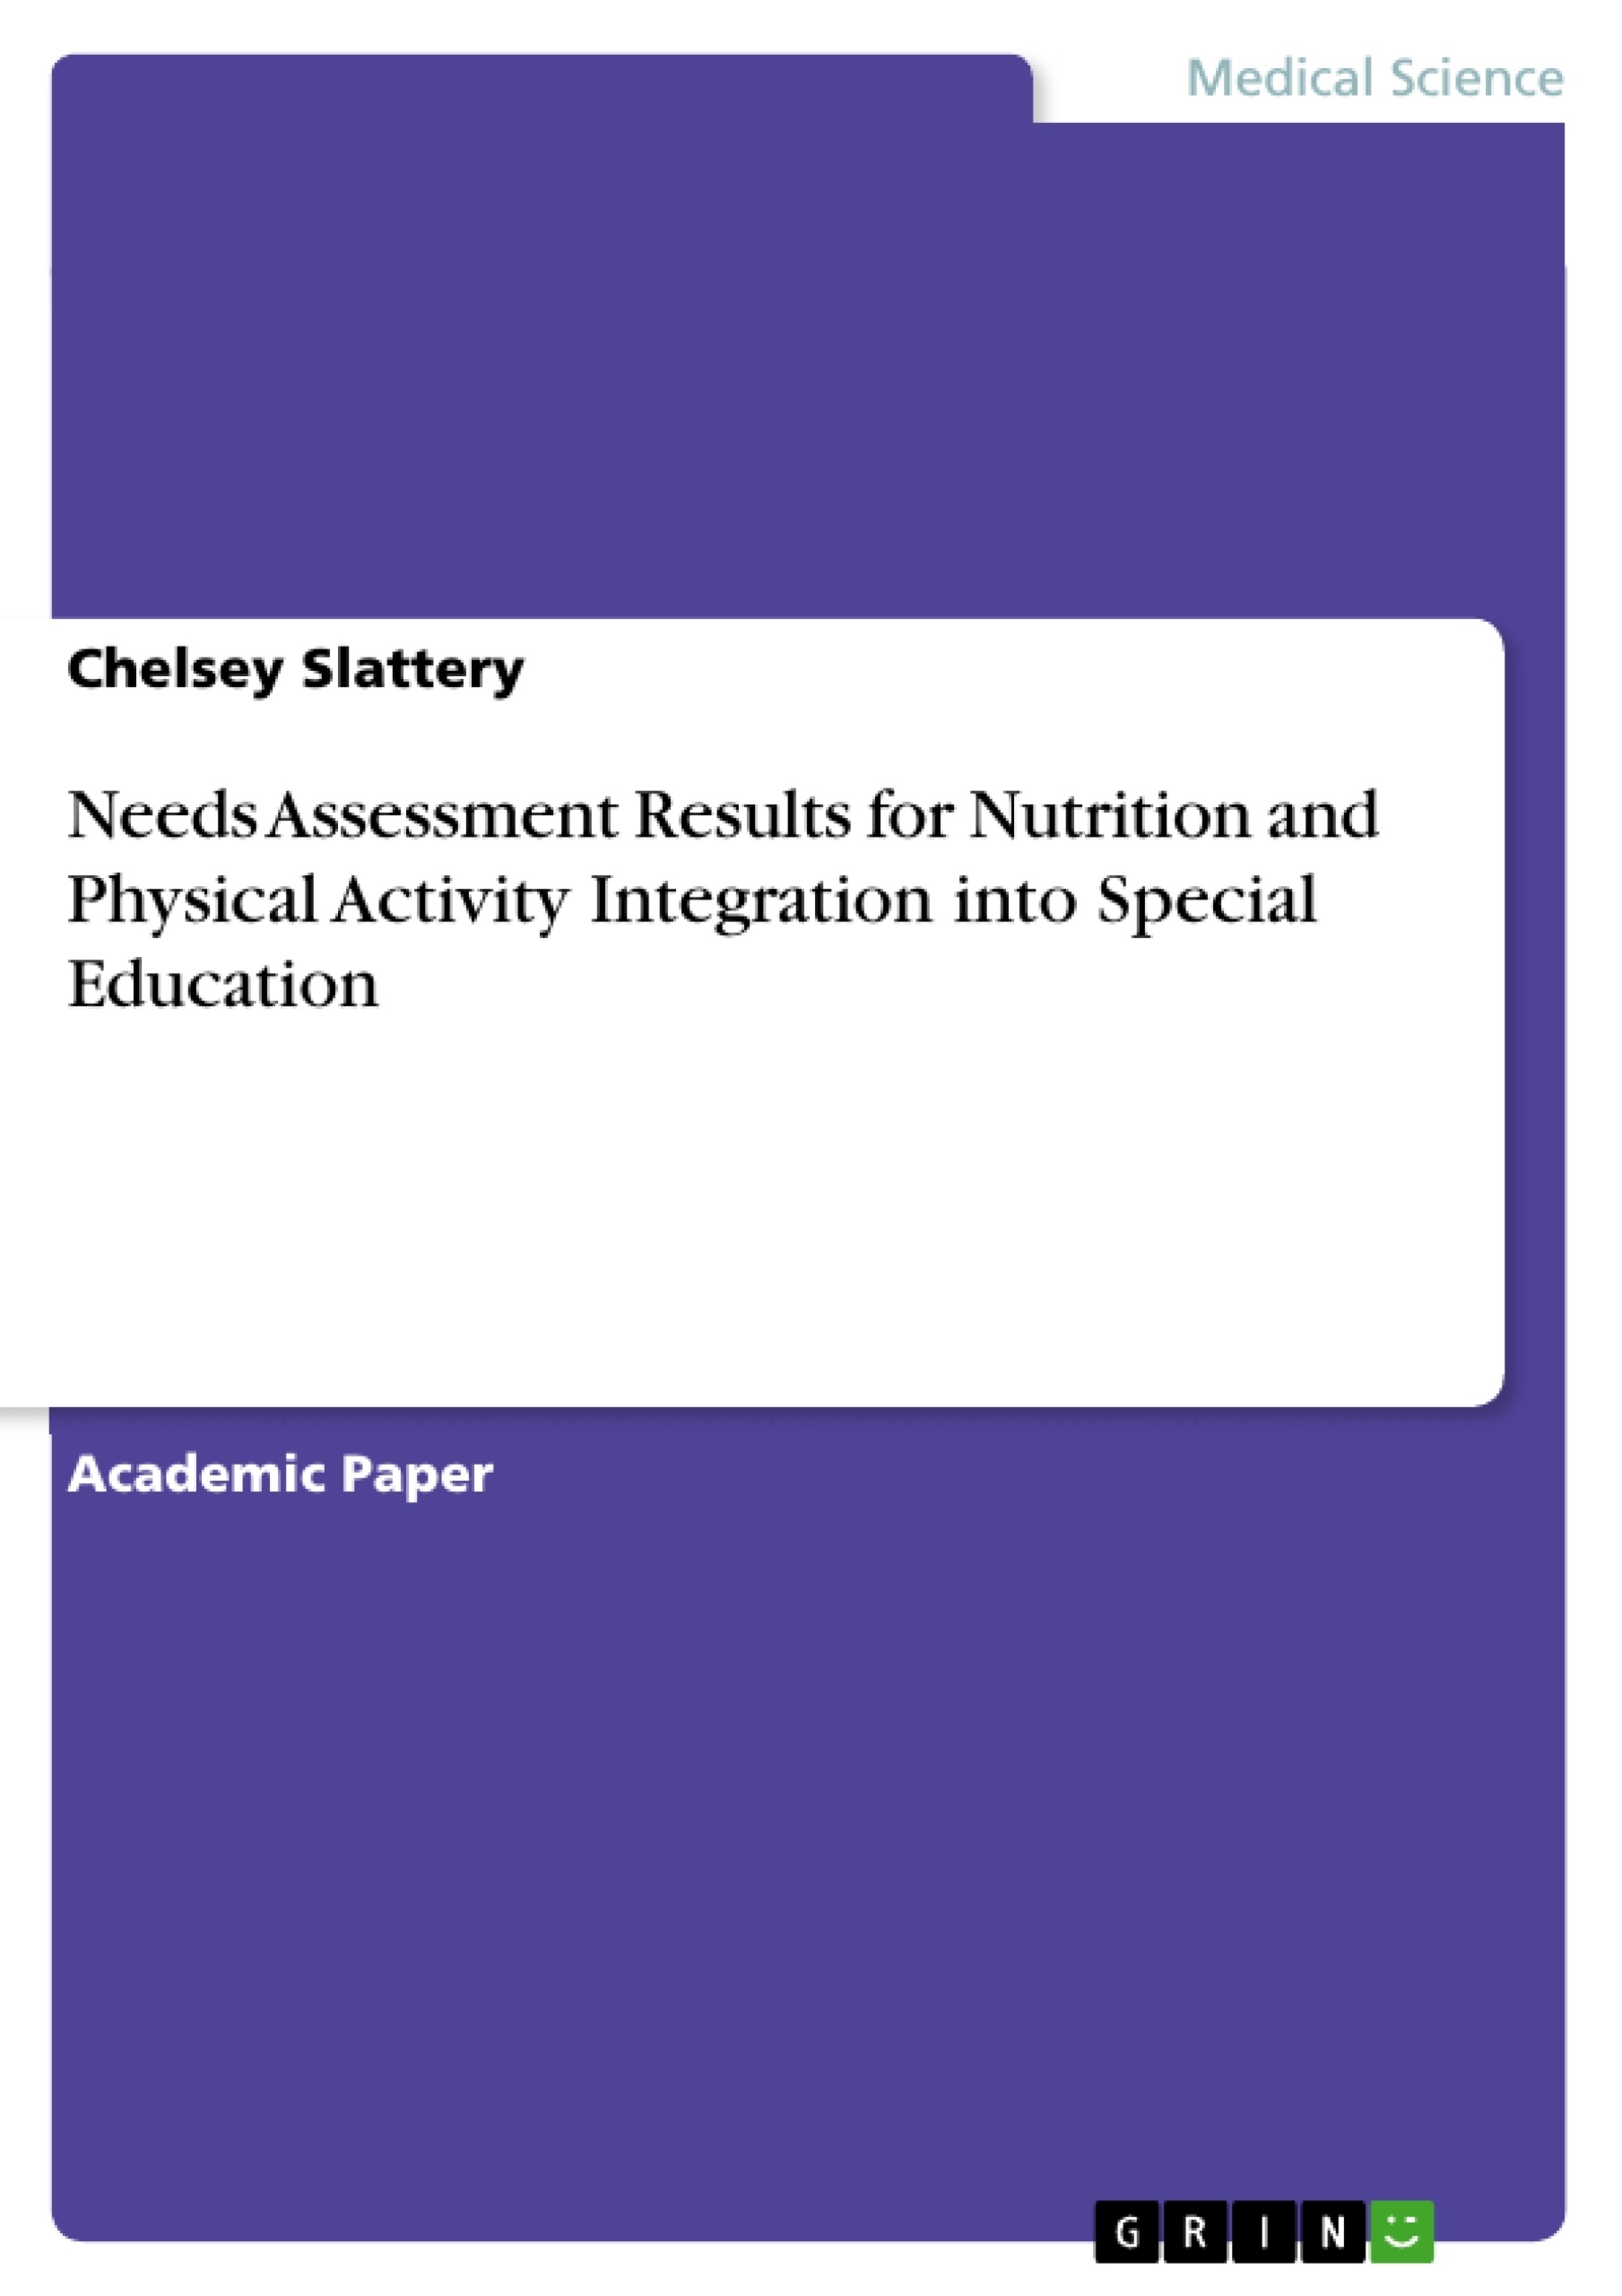 Titre: Needs Assessment Results for Nutrition and Physical Activity Integration into Special Education